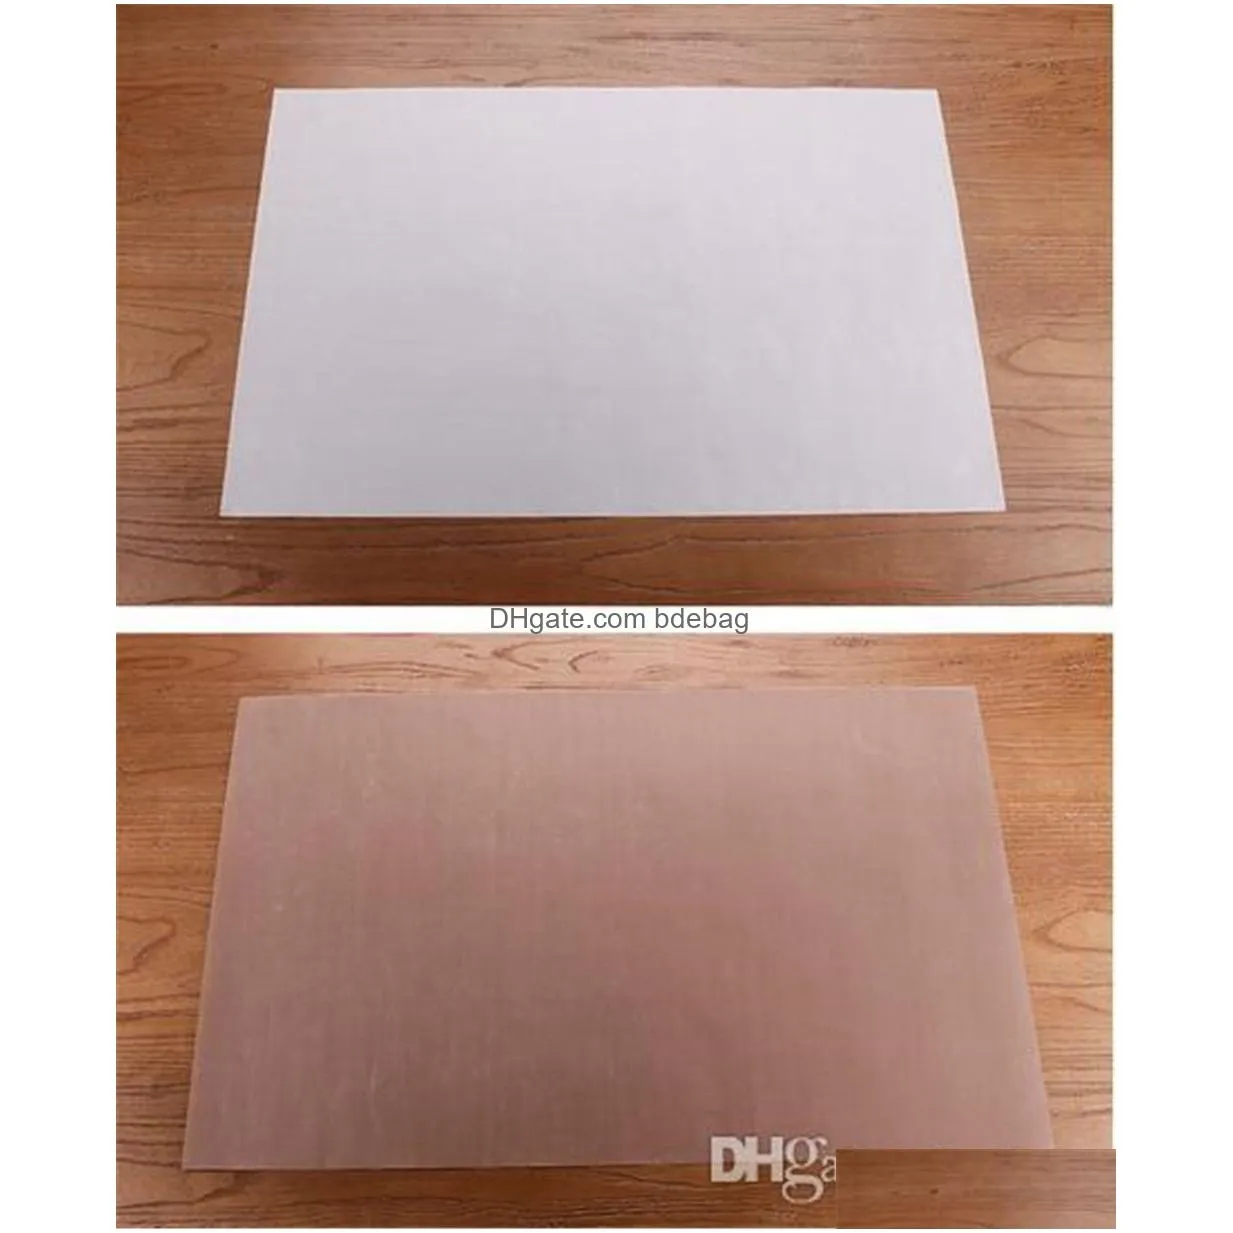  kitchen dining bar bakeware mat oil paper baking sheet for pastry kitchen tool 30x40cm